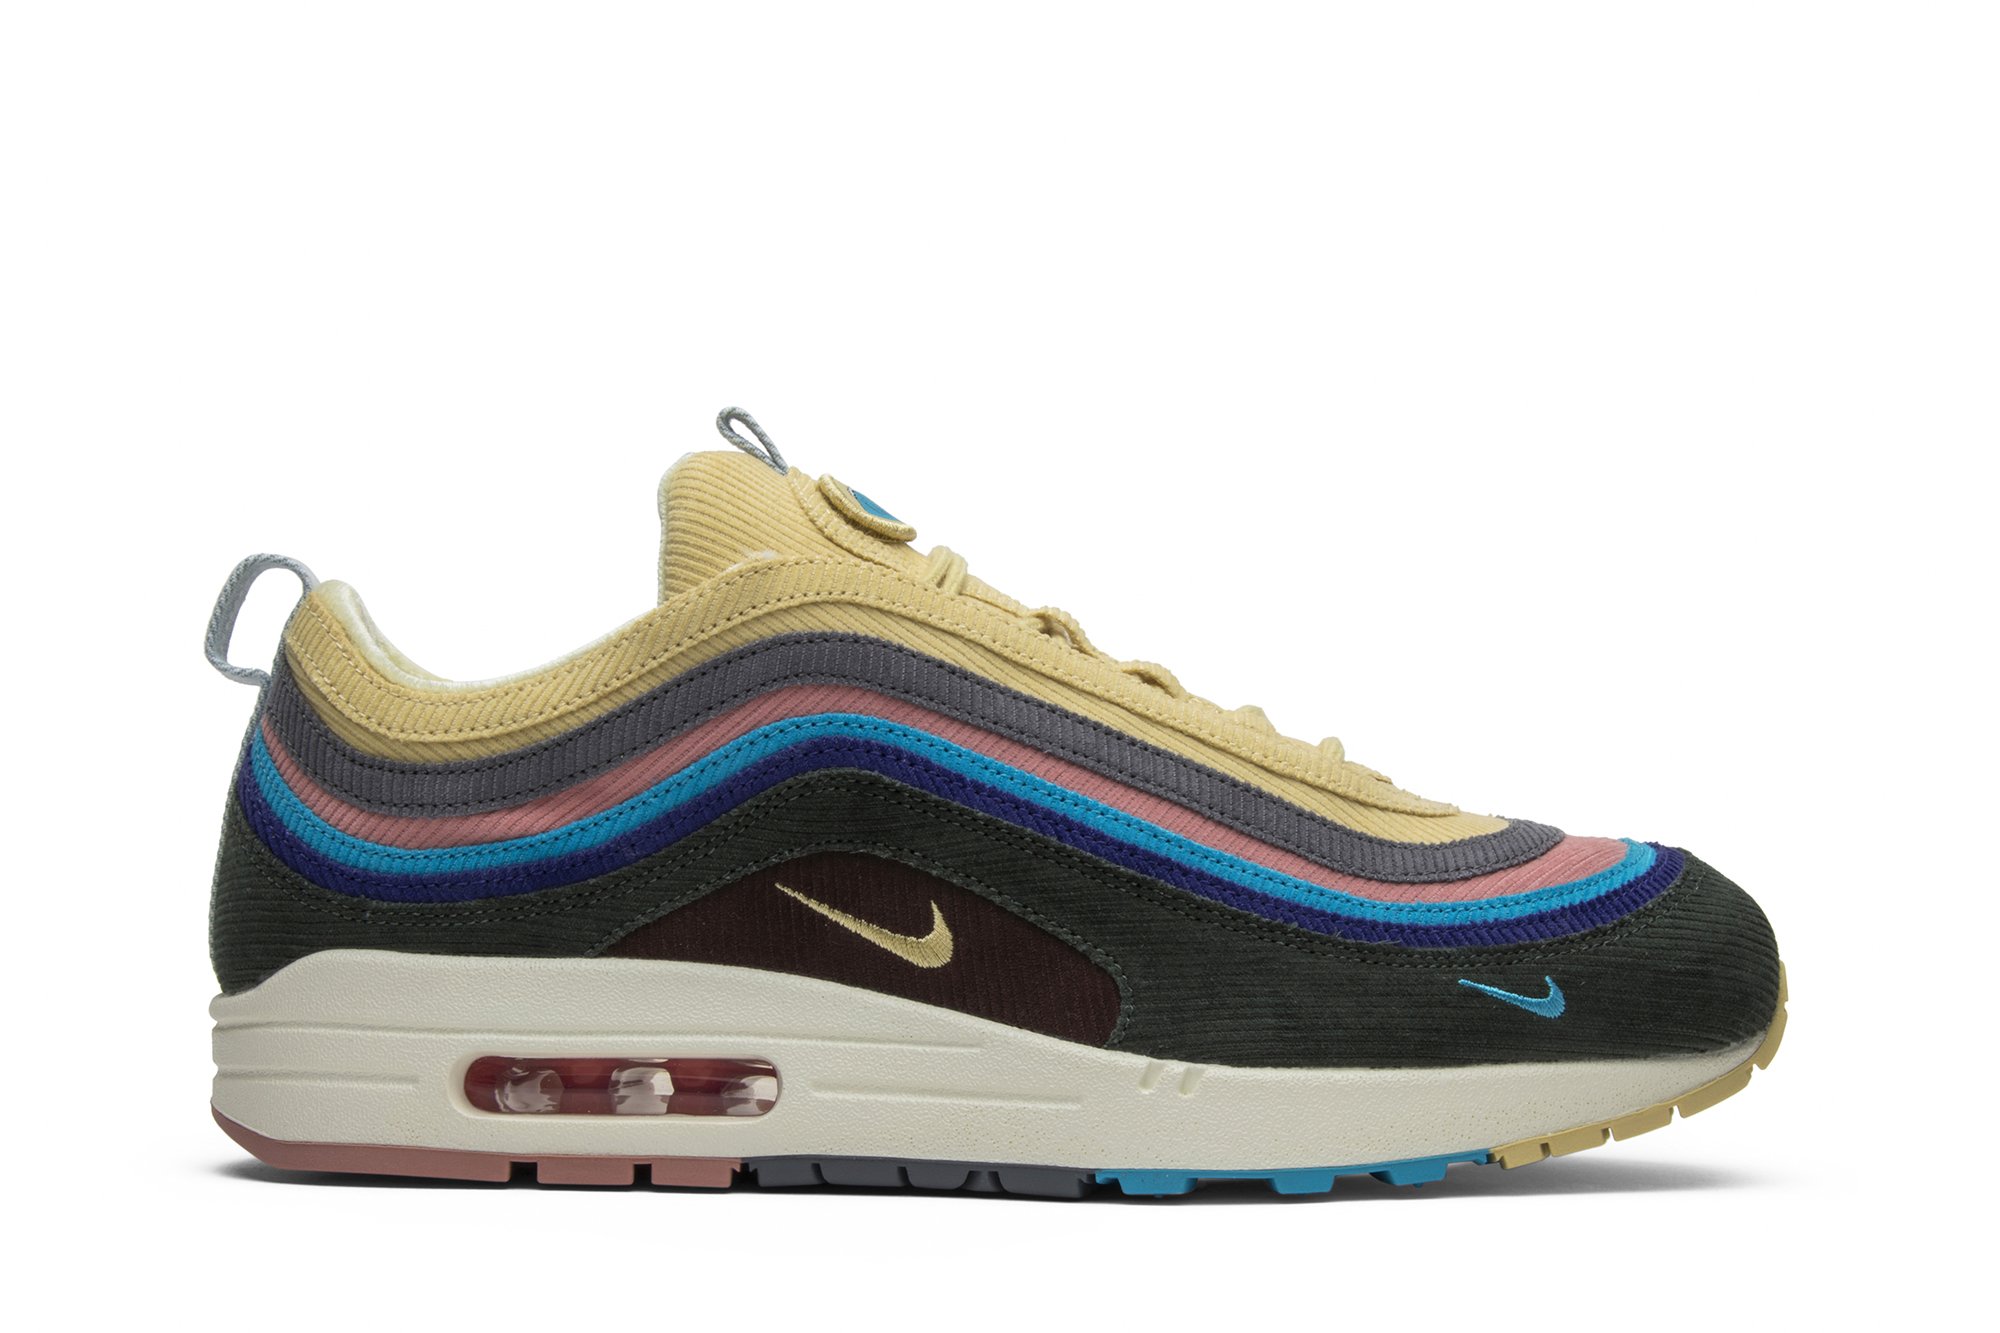 Sean Wotherspoon x Air Max 1/97